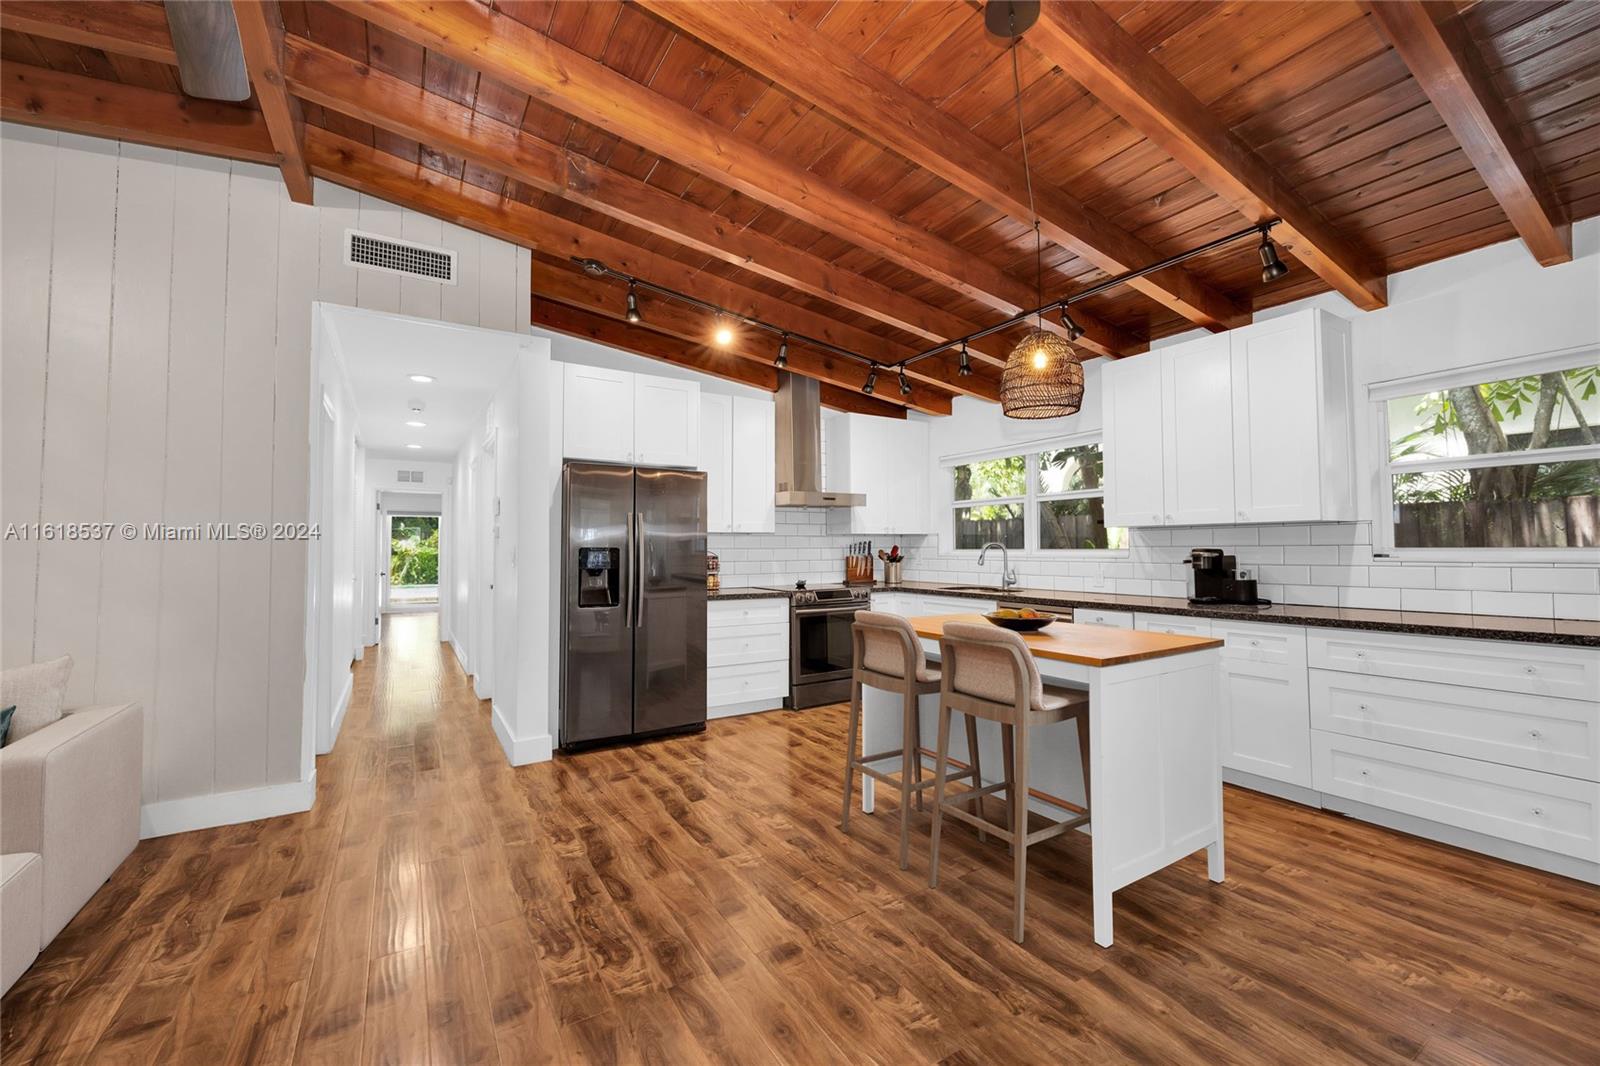 Endless opportunity and possibilities await with this renovated midcentury home on a fully gated corner lot in a prime location. Move right in, add on, or rebuild on the only 9,000+ sqft lot under $2.5M in all of Coconut Grove. The interior features impact windows/doors, vaulted wood beam ceilings throughout, renovated kitchen and bathrooms, luxury vinyl floors, fireplace, and laundry room. A screened front porch creates additional living space for friends and family to gather. Enjoy a lush yard, wood deck, and generous swimming pool. Create your dream home and live the Coconut Grove lifestyle with dining, shopping, and top public/private schools nearby. Some photos virtually staged.